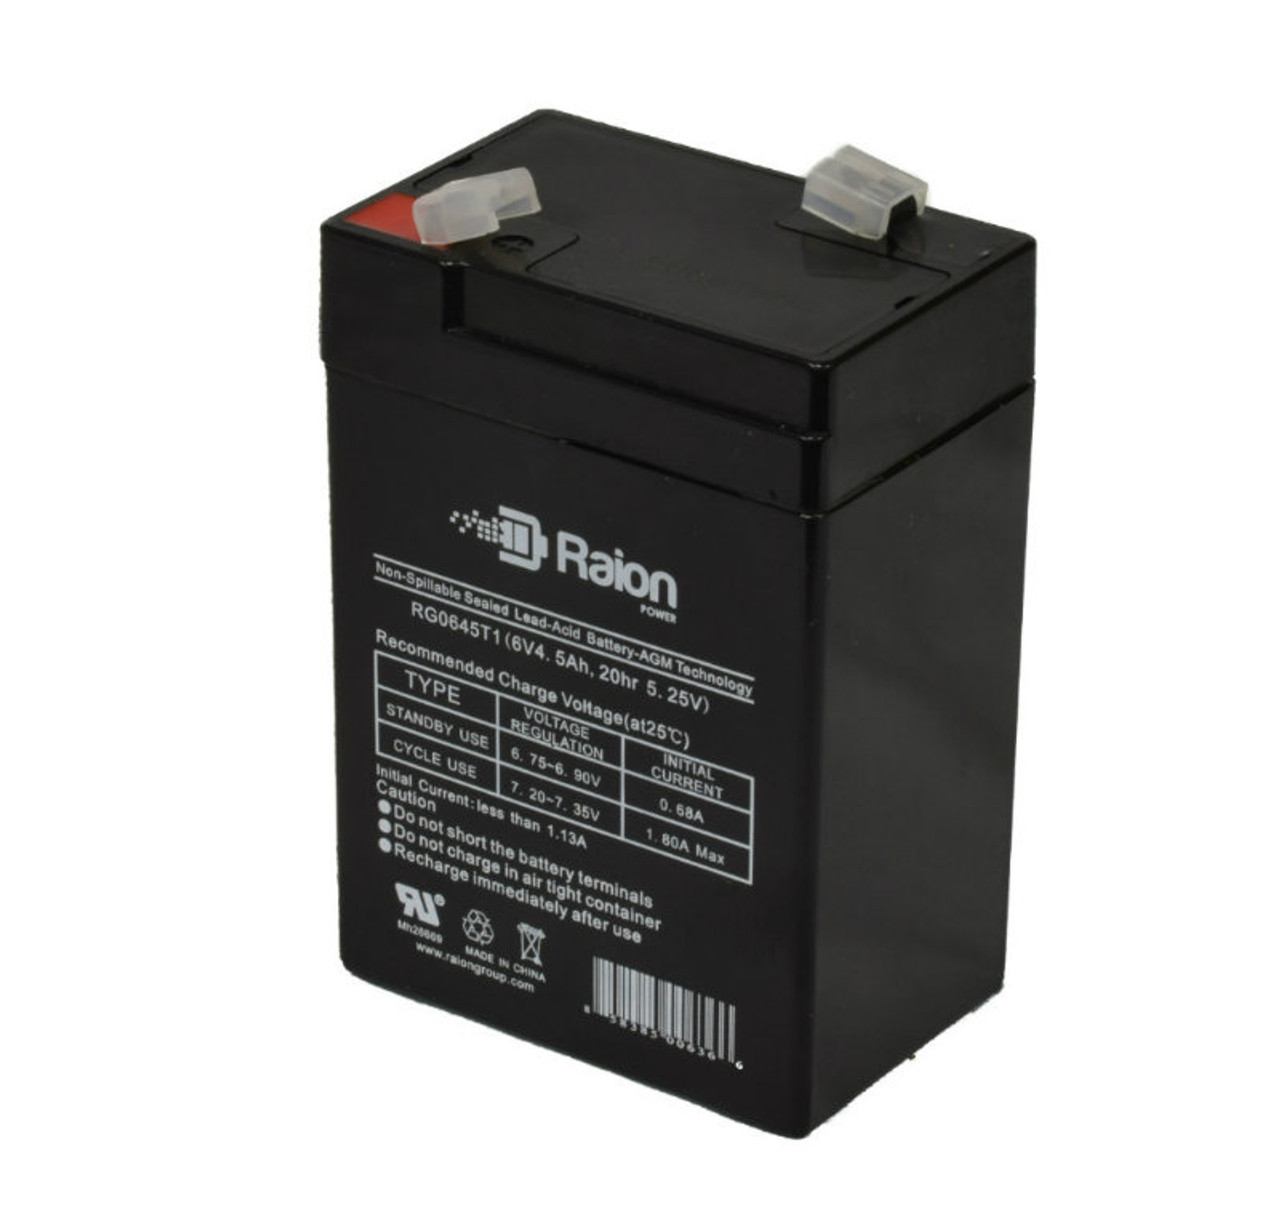 Raion Power RG0645T1 6V 4.5Ah Replacement Battery Cartridge for Kid Trax KT1520WM Rideamals Tiger Toddler Ride-On